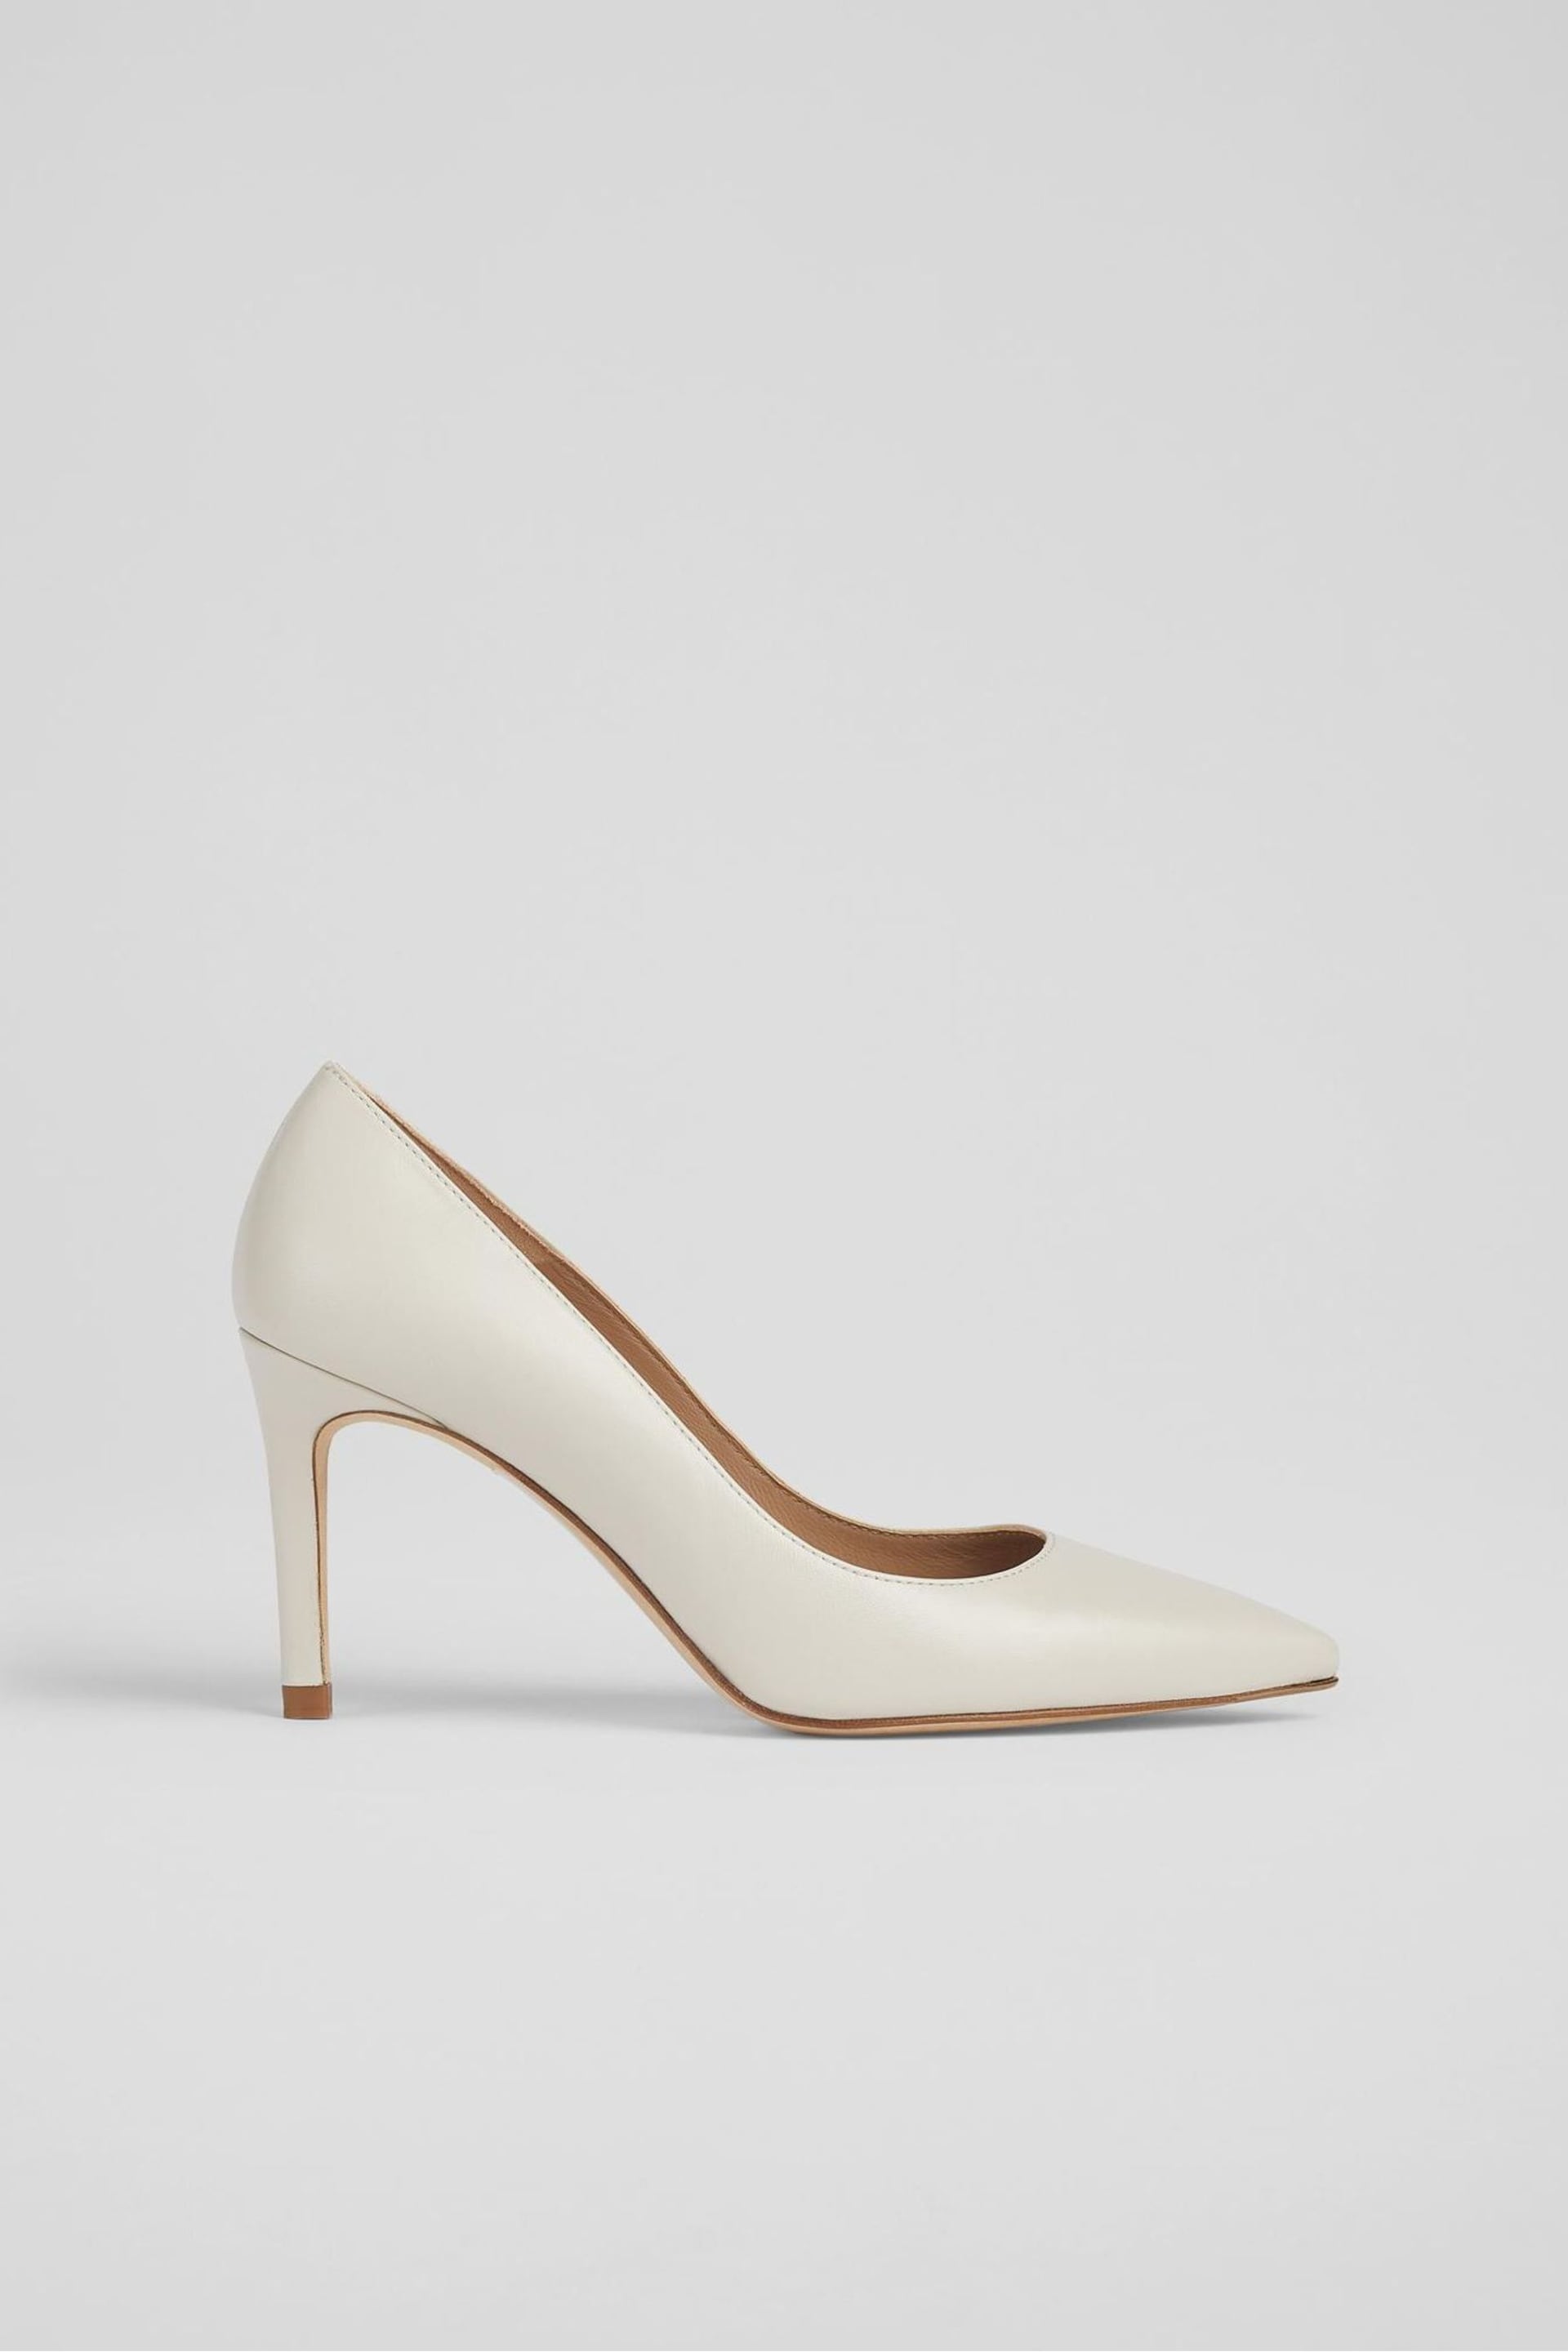 LK Bennett Floret Leather Pointed Court Shoes - Image 1 of 4